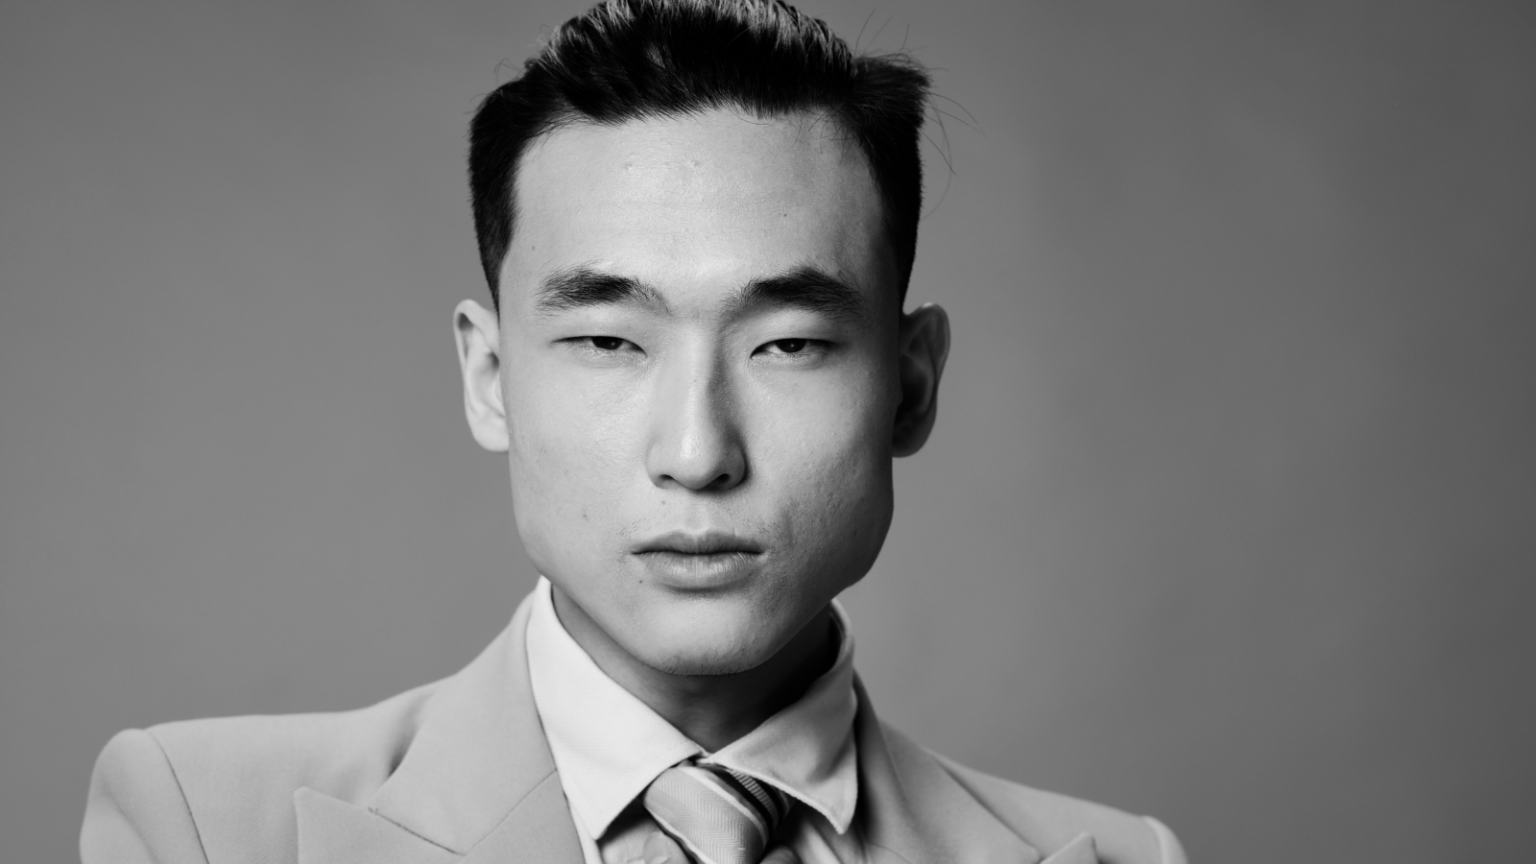 Photo of a masculine Asian person wearing a suit and looking sternly at the camera